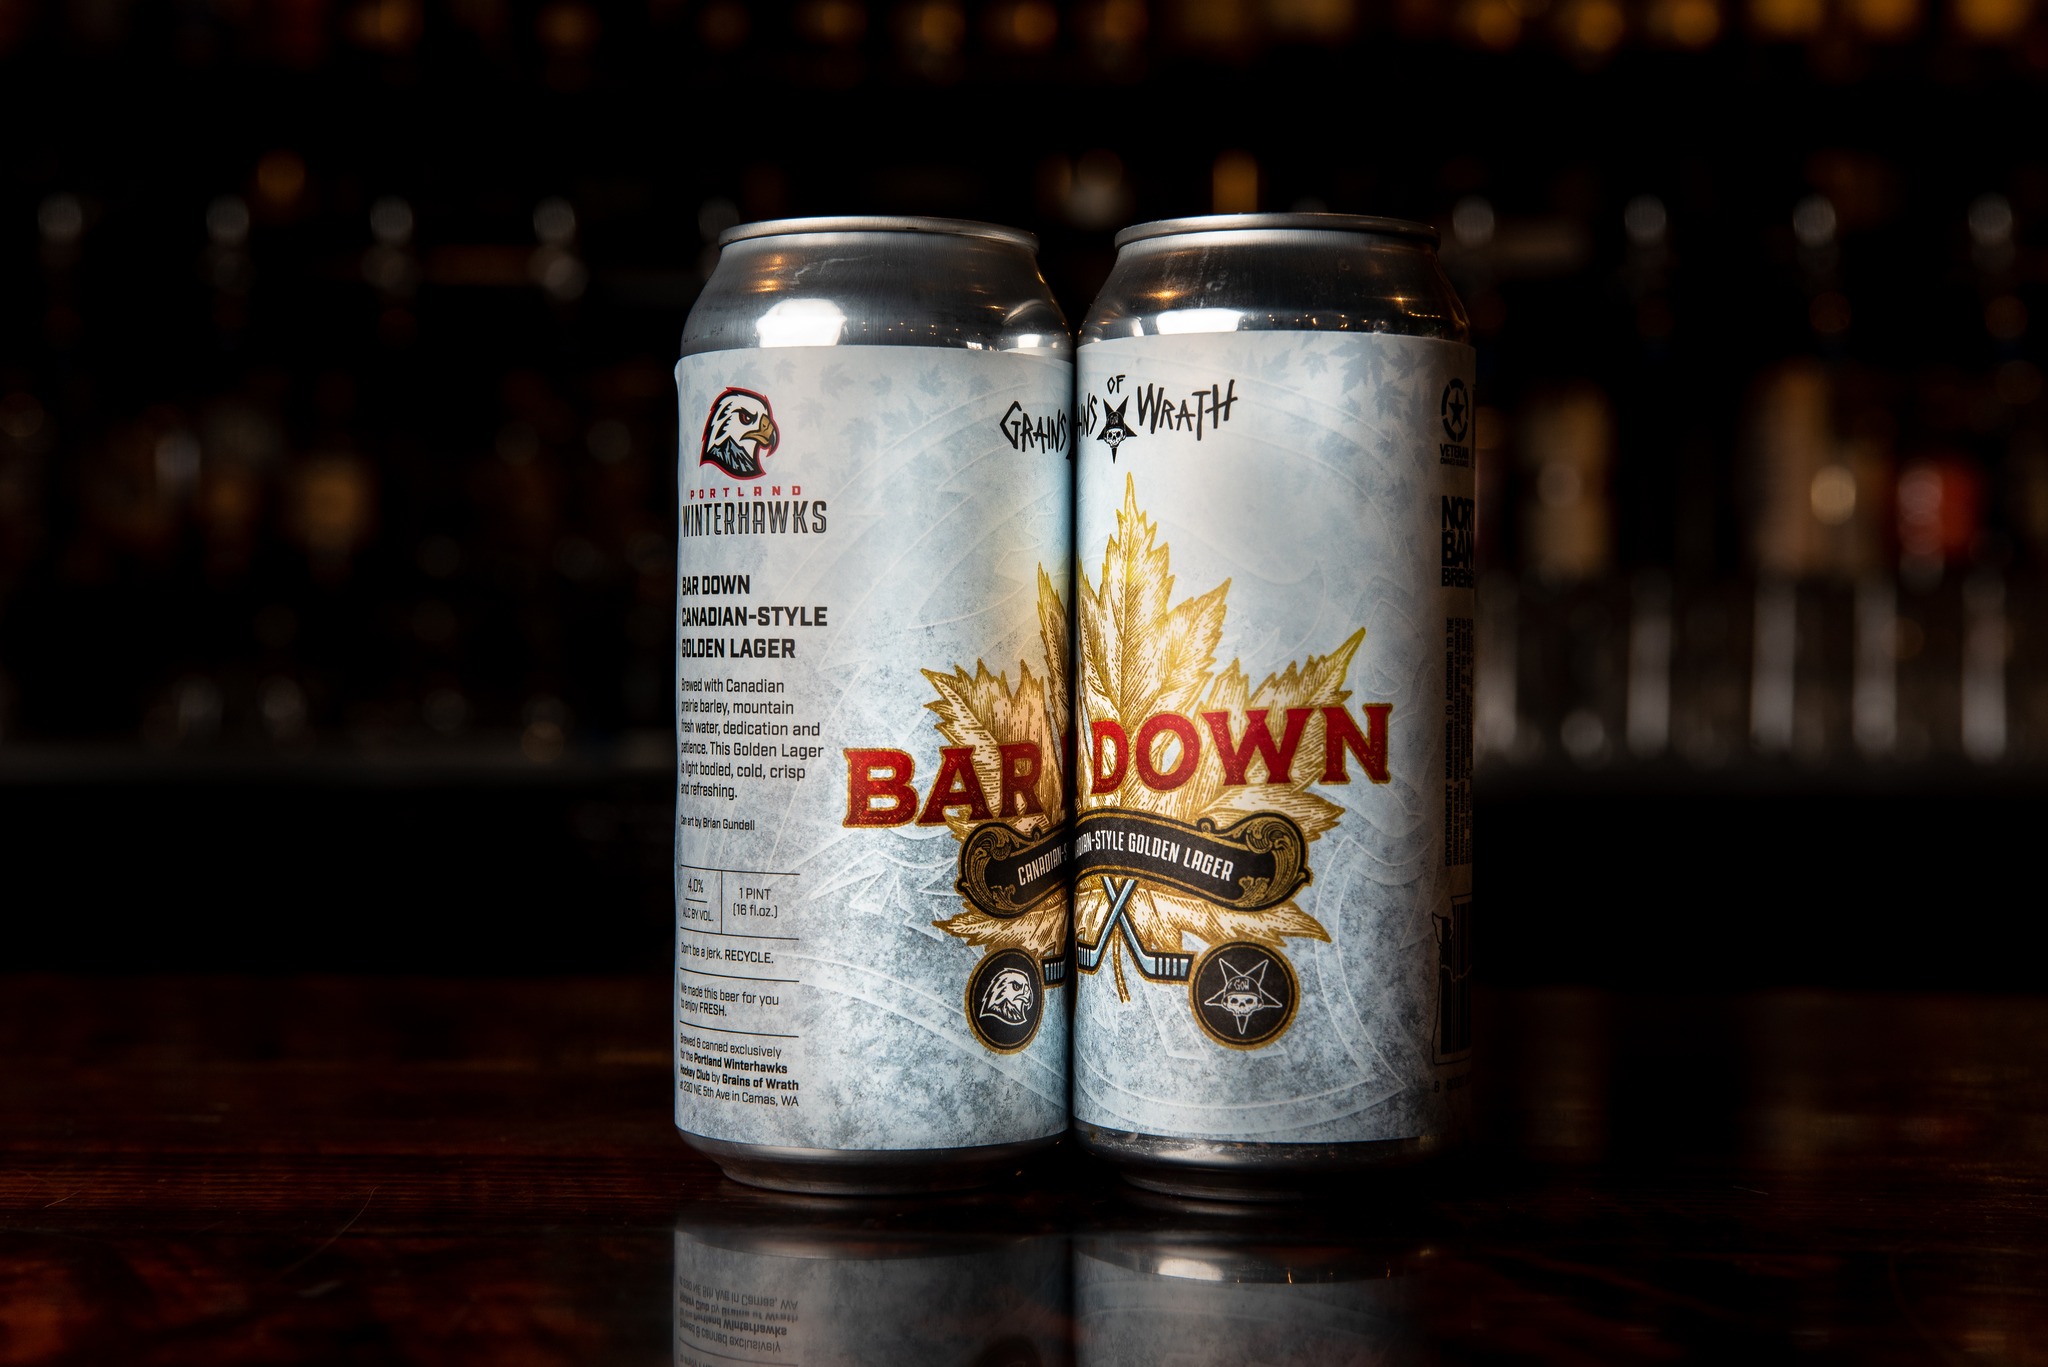 Portland Winterhawks and Grains of Wrath partner on Bar Down Canadian Style Golden Lager. (image courtesy of Grains of Wrath)